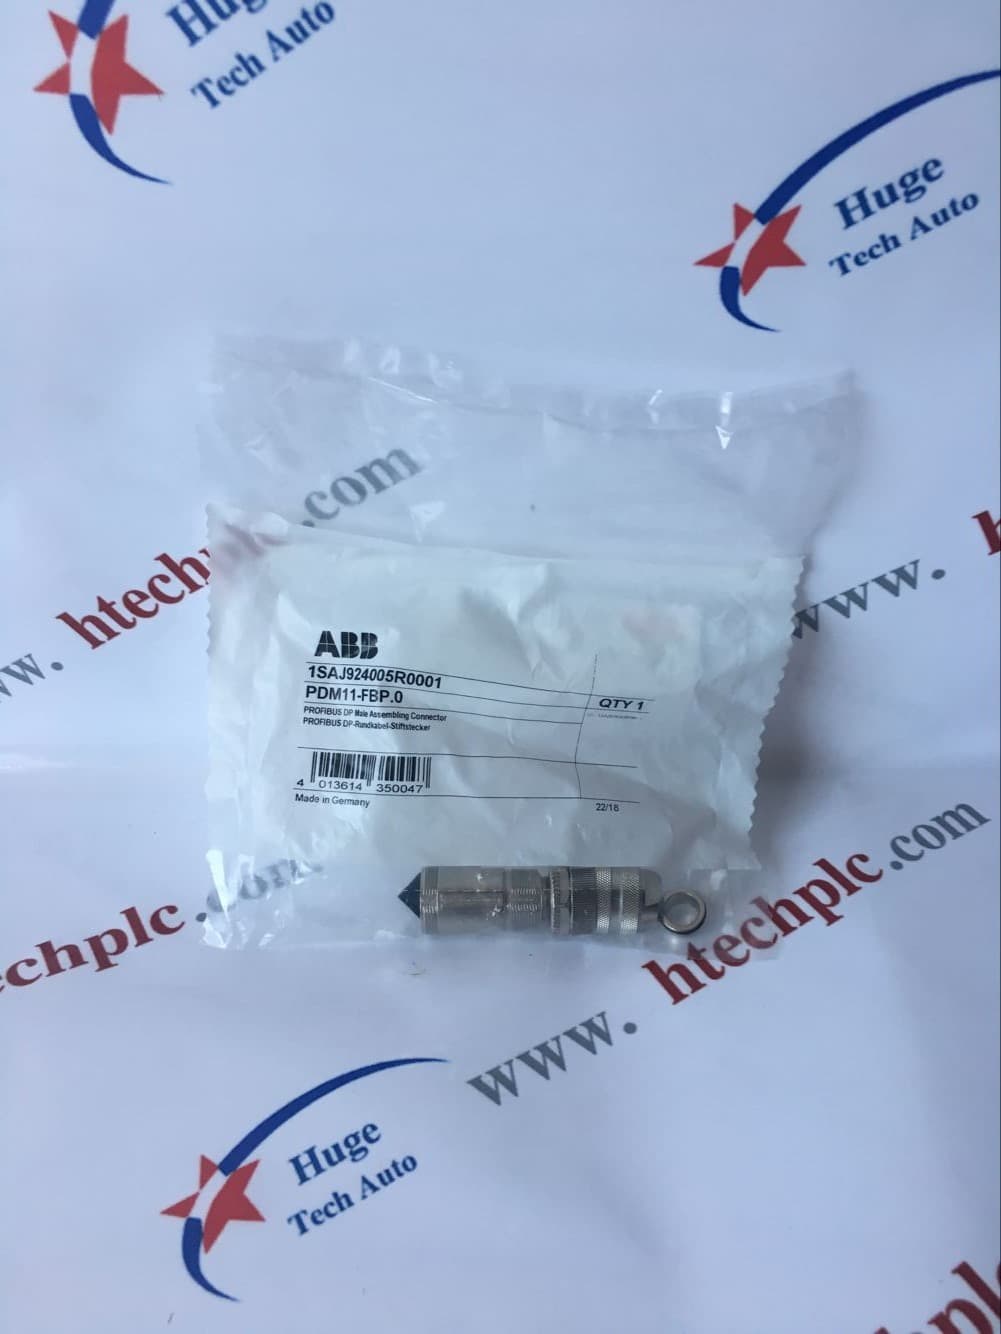 ABB 5STP 03D6501 industrial spare parts with 12 months war